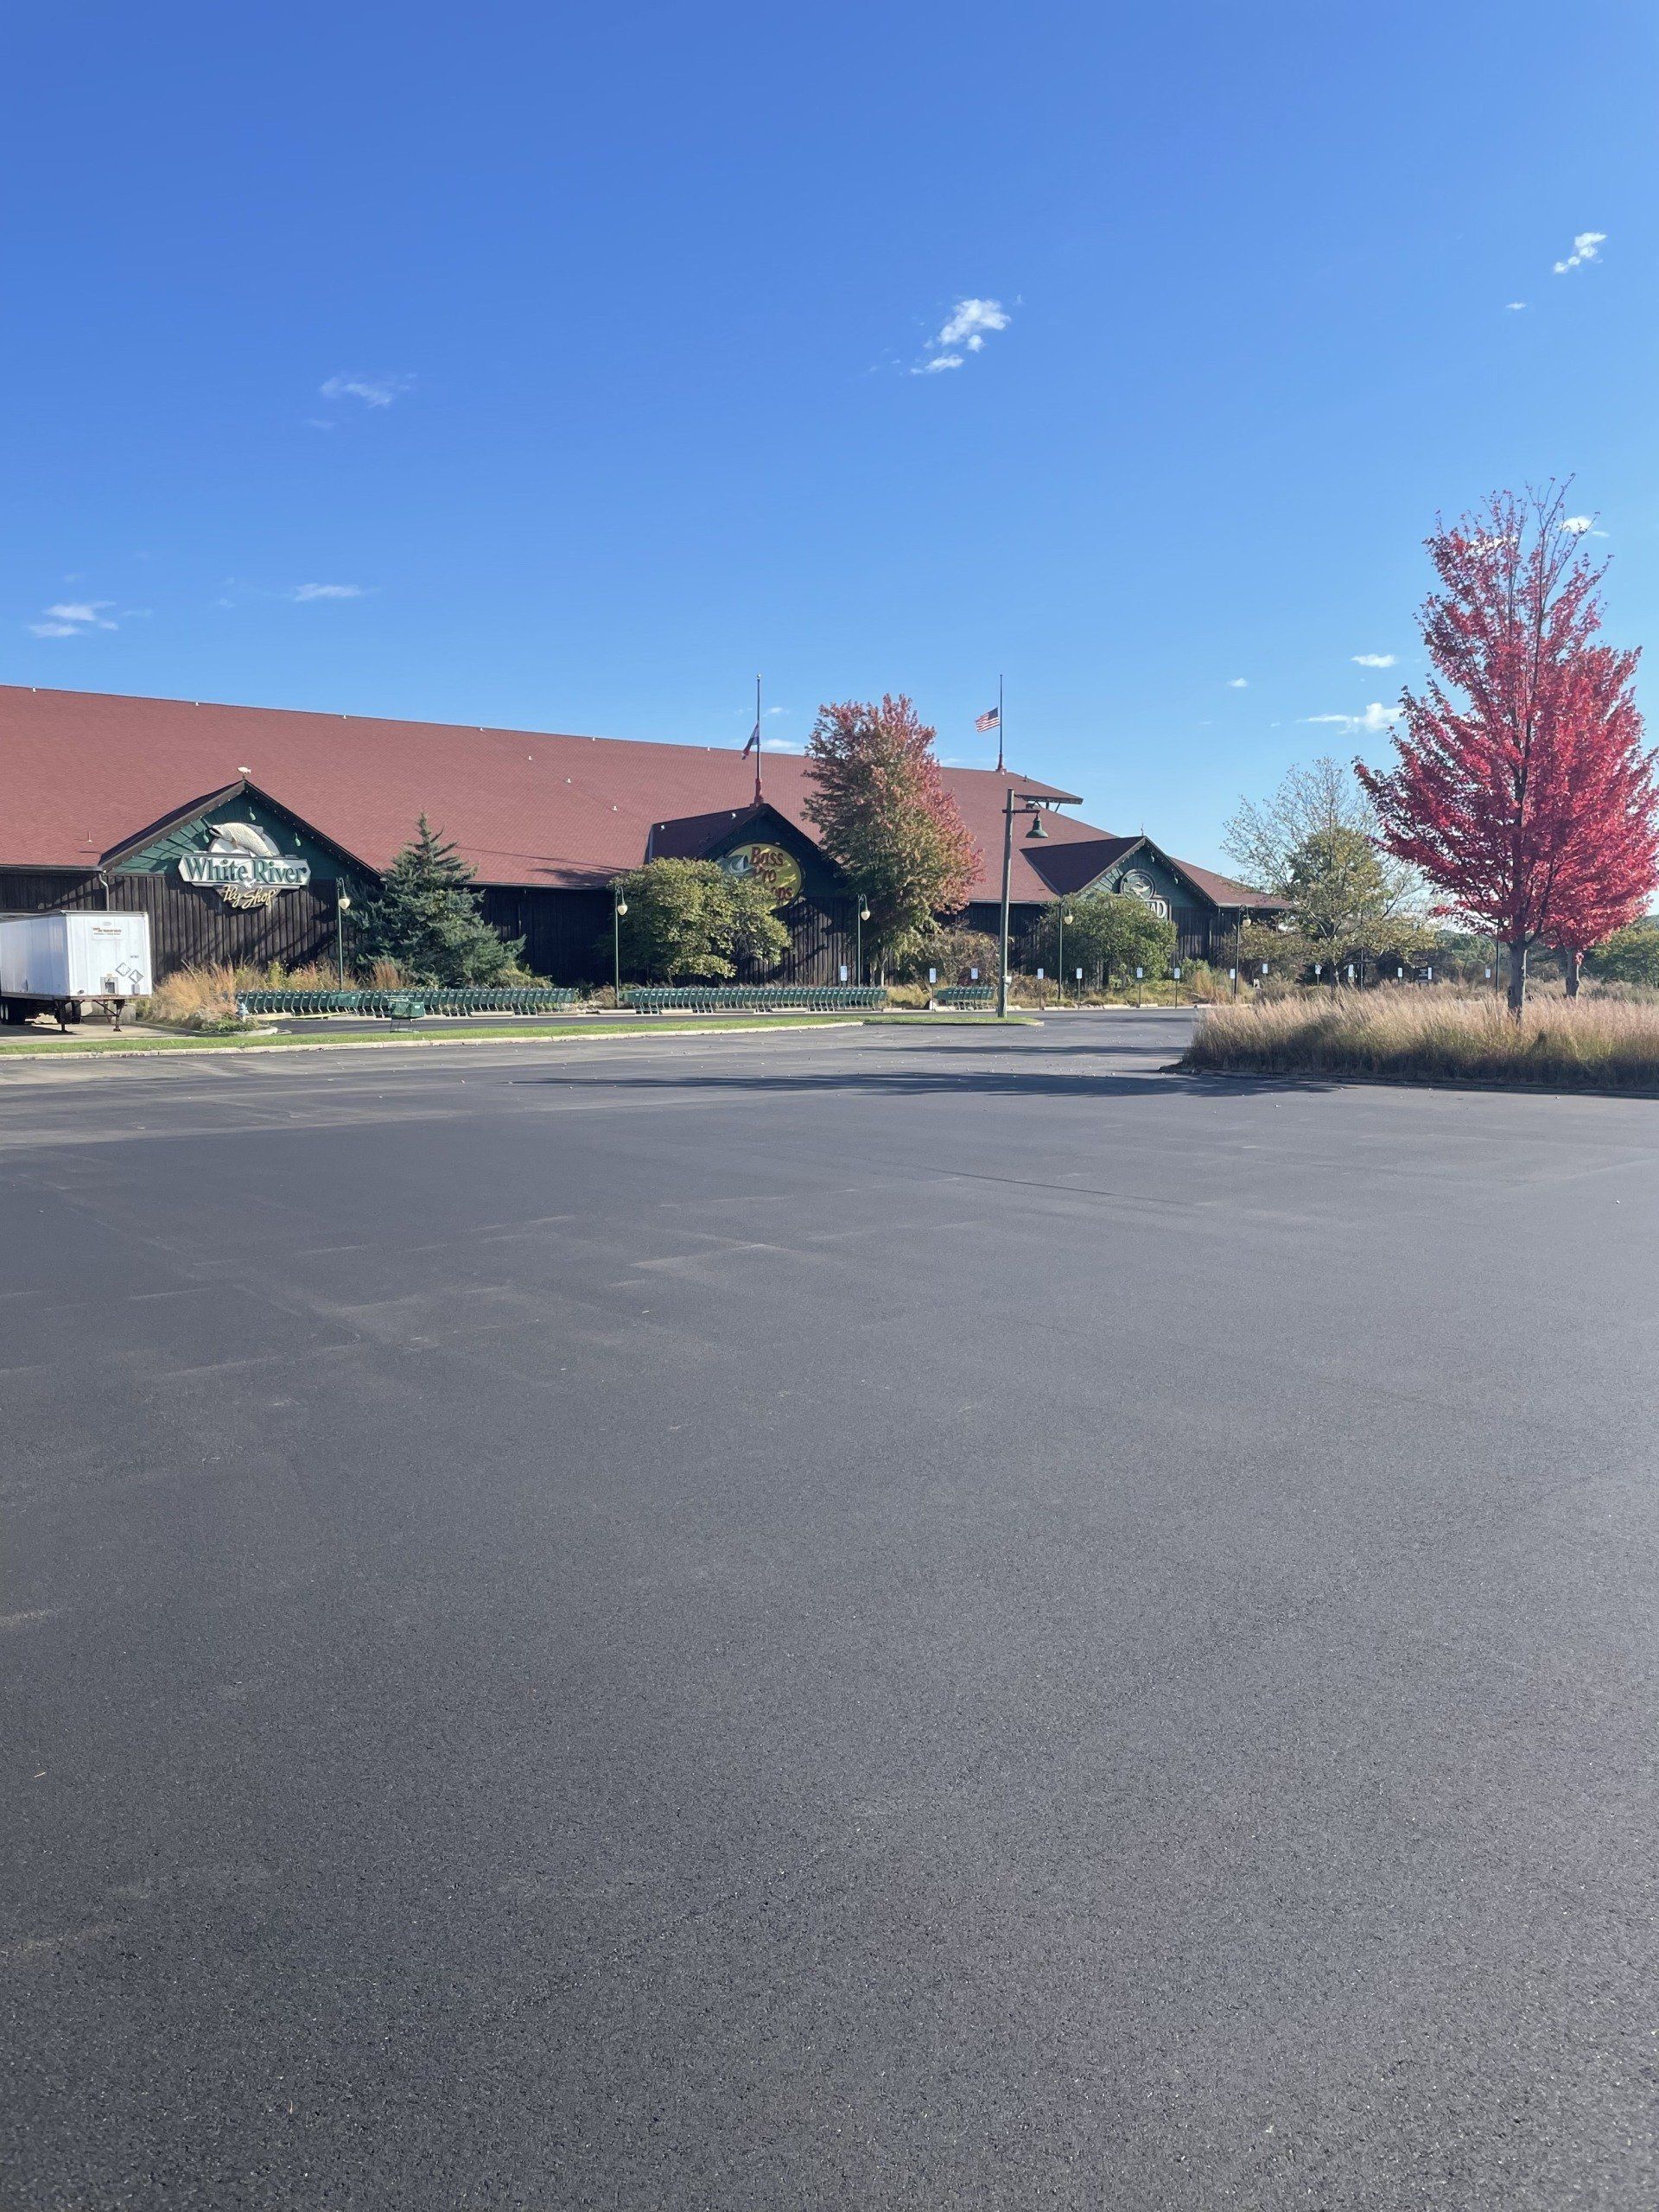 MoSEAL Is Proud to Pave & Repair Commercial Asphalt Parking Lots in Fayette, MO.